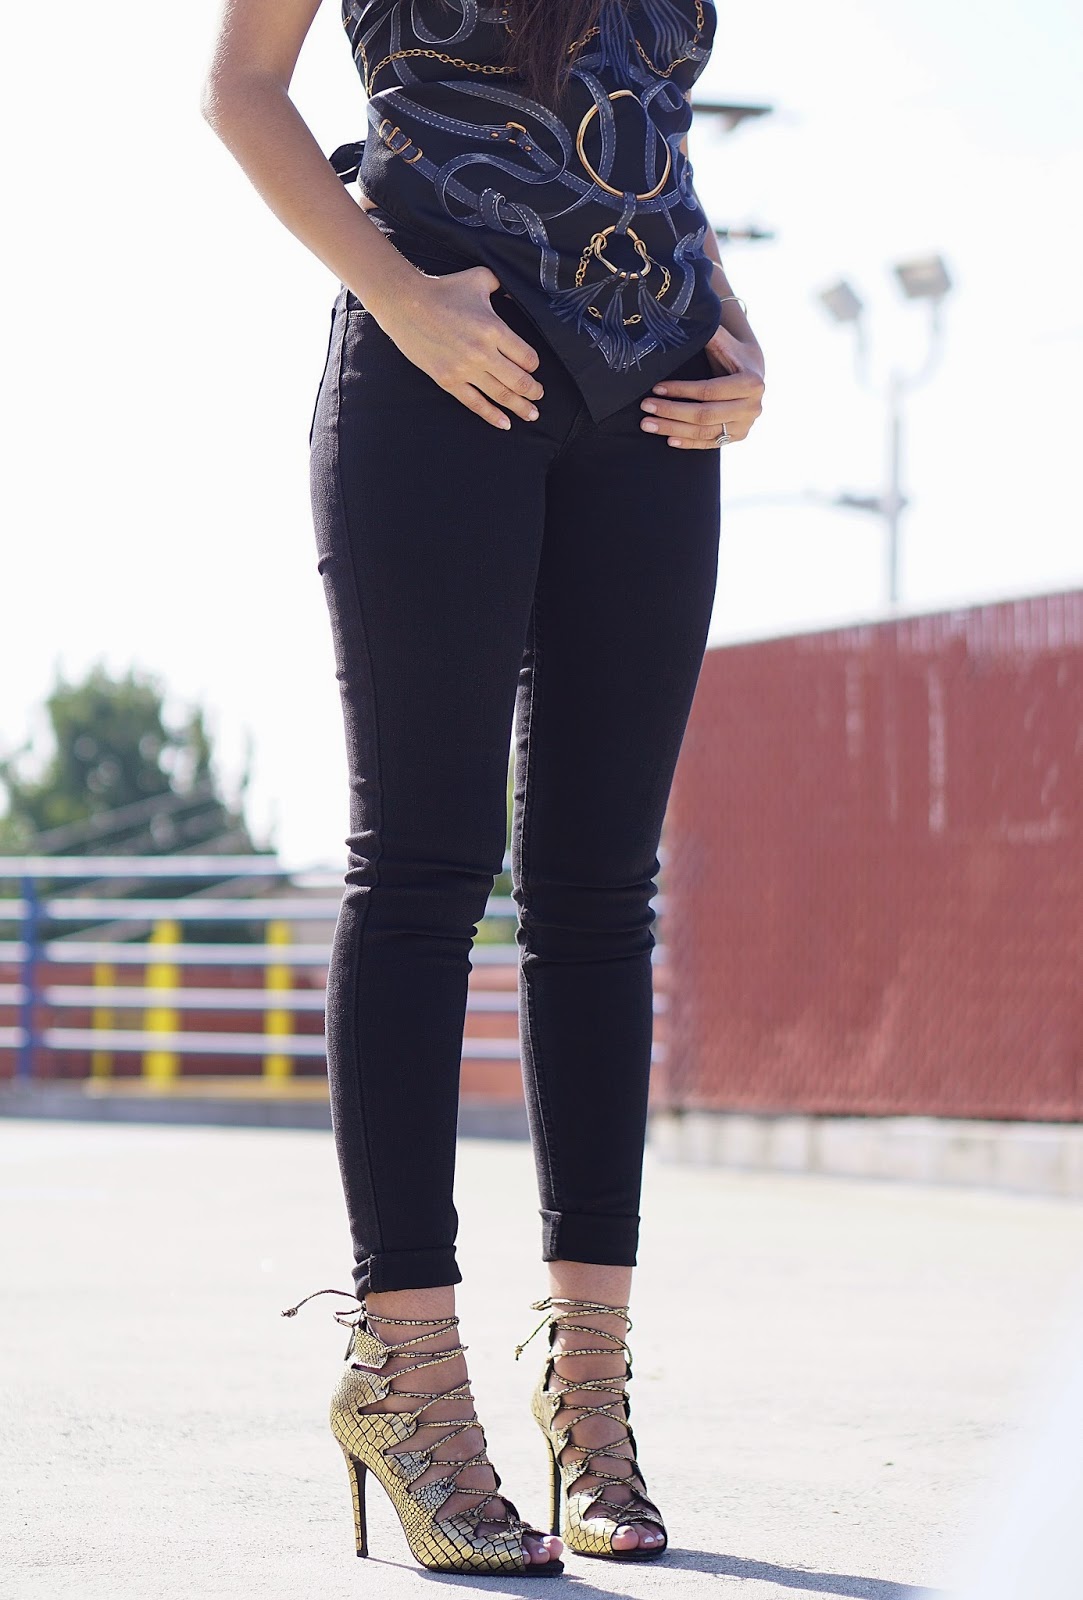 Top, Scarf Top, H&M Scarf, Black Jeans. Jeggings, Levis, Levis 535 Black Jeggings, Schutz heels, Schutz Black and Gold Croc Heels, Fall Fashion in california